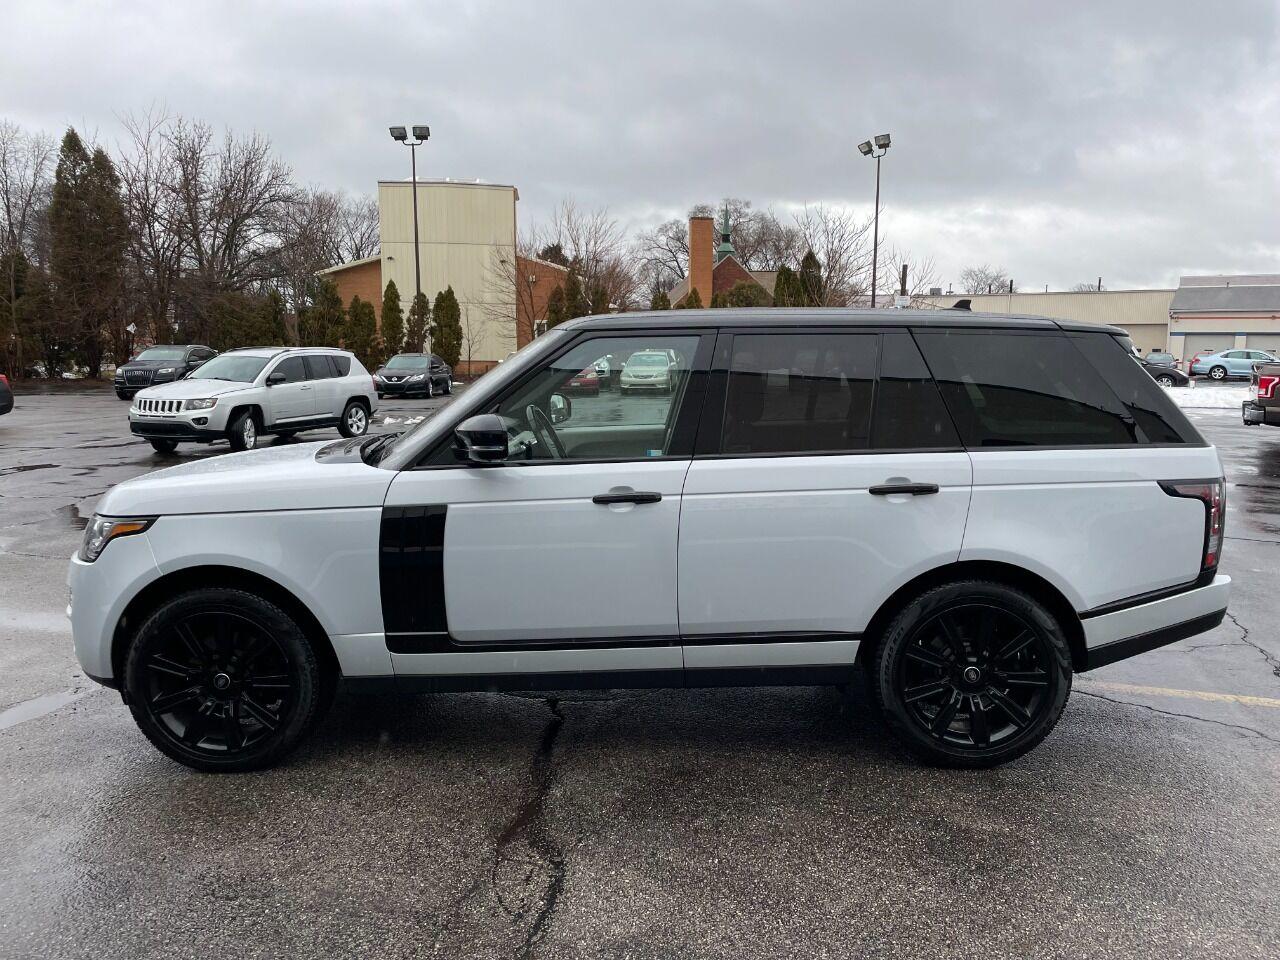 2016 Land Rover Range Rover HSE Td6 AWD 4dr SUV